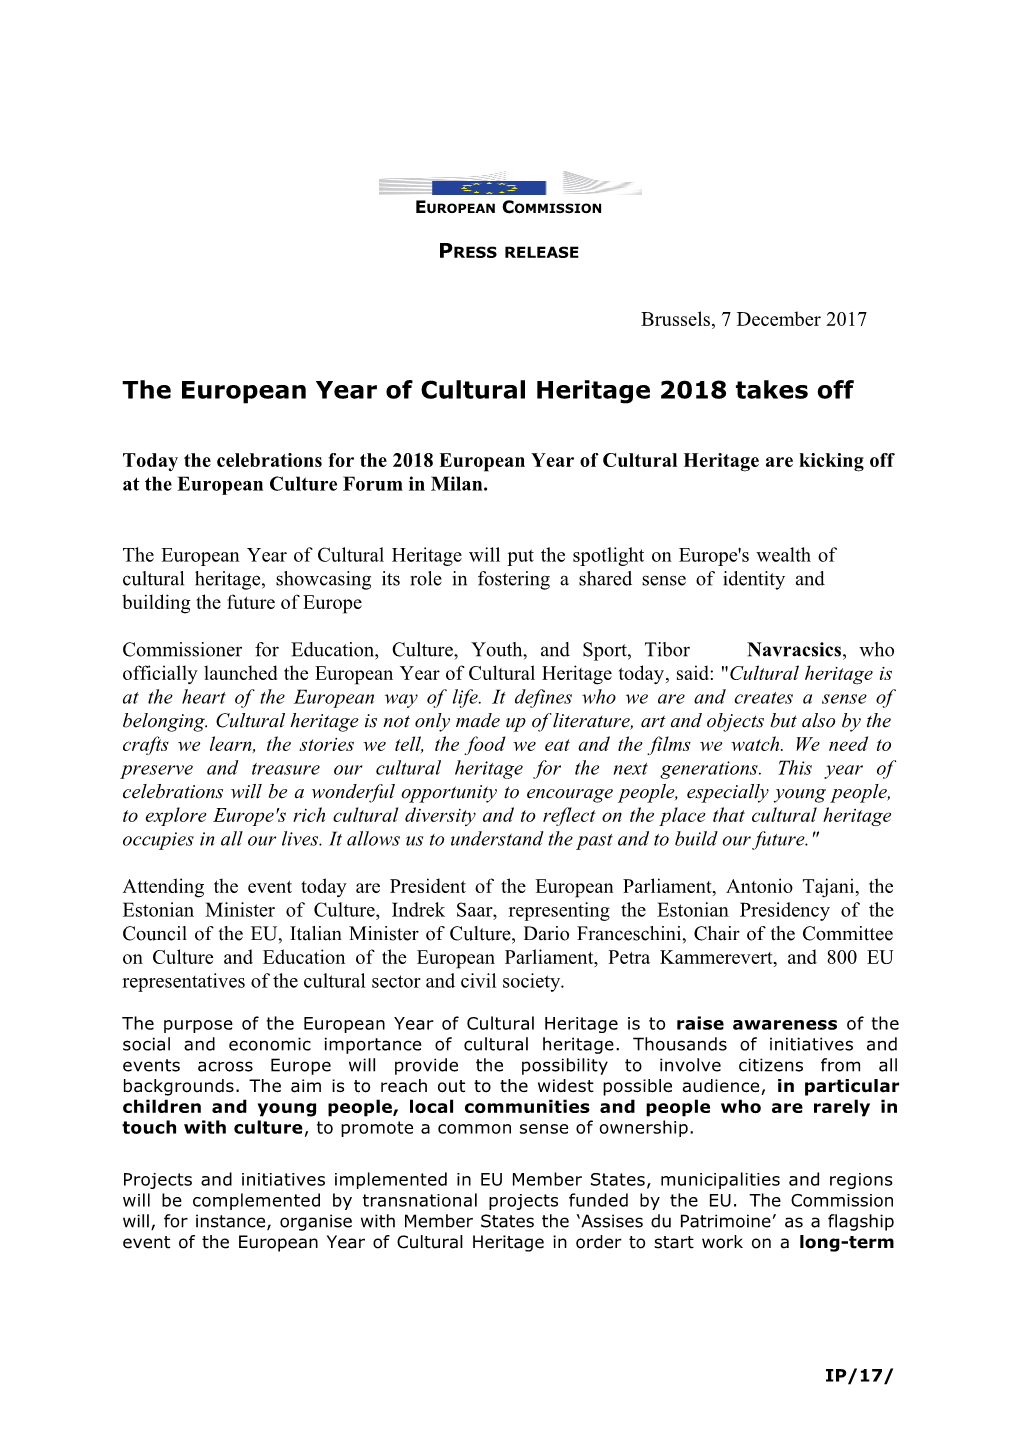 The European Year of Cultural Heritage 2018 Takes Off